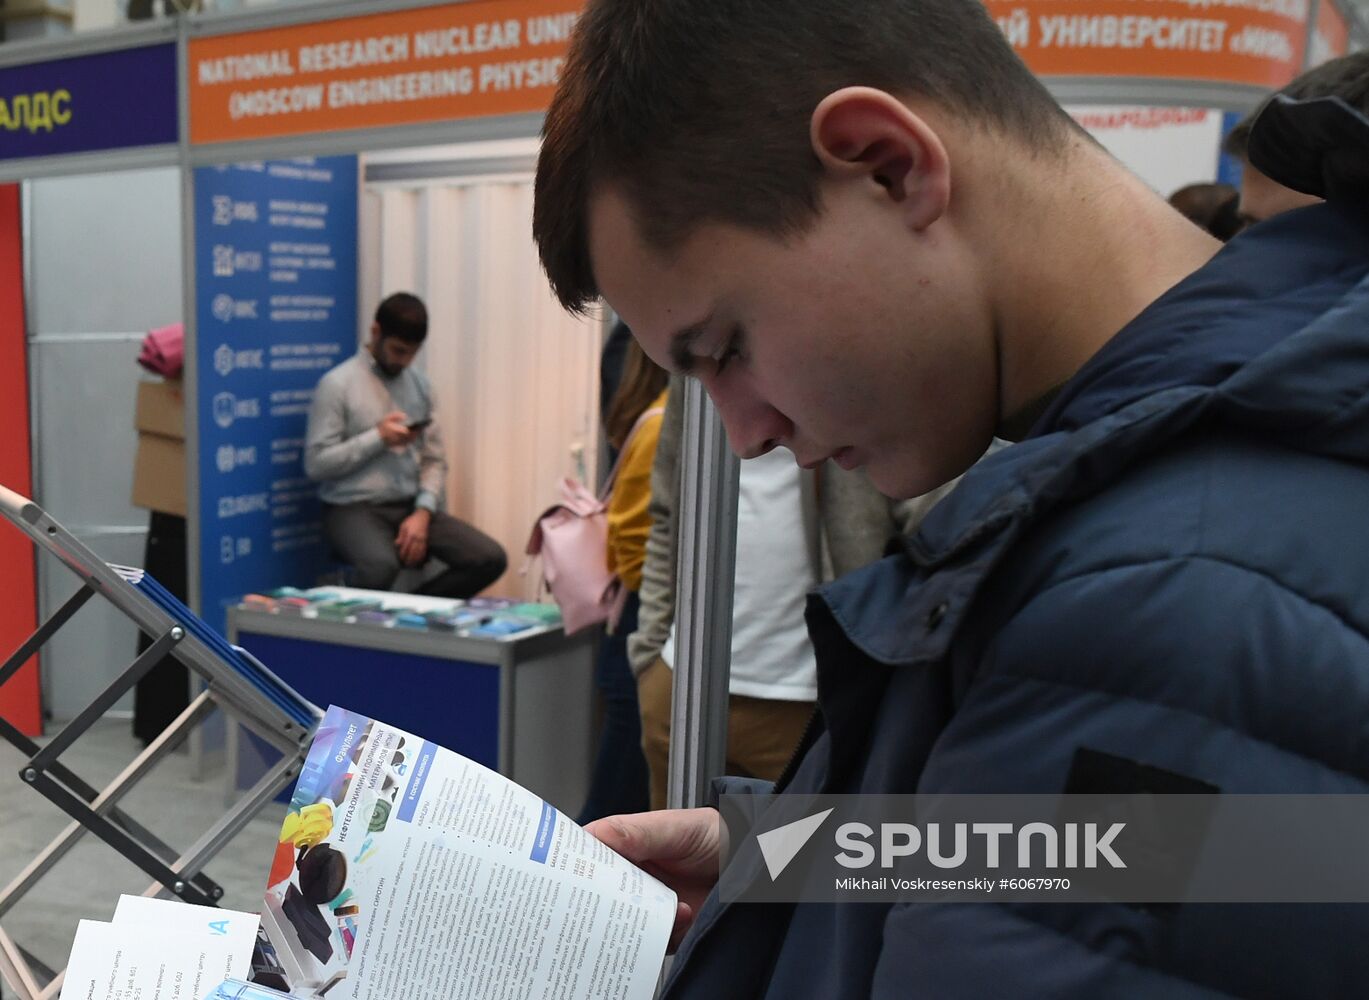 Russia Career and Education Exhibition 